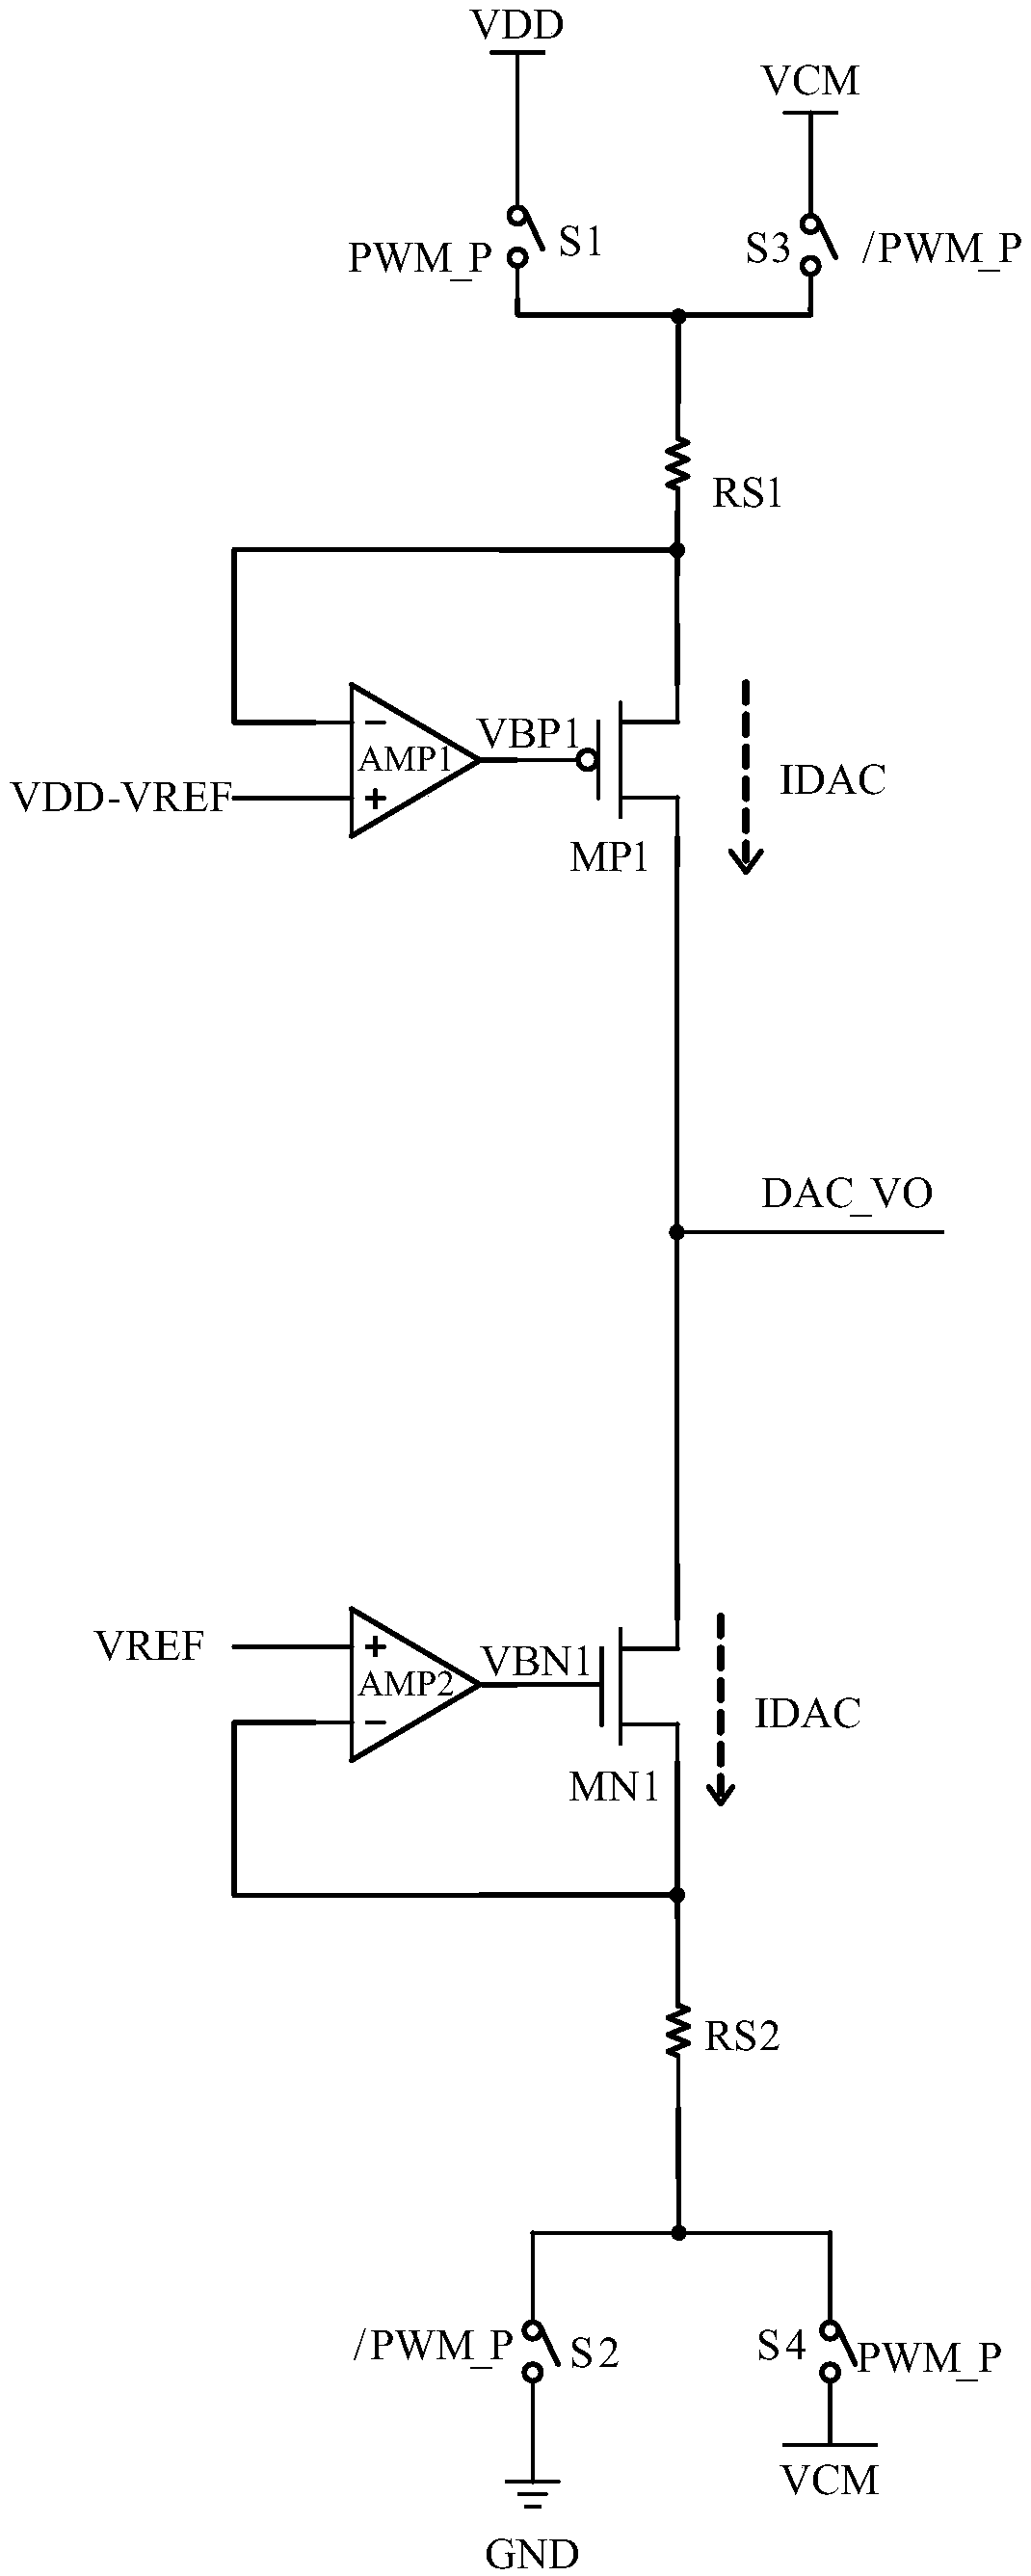 A digital-to-analog converter and a digital power amplifier subsystem